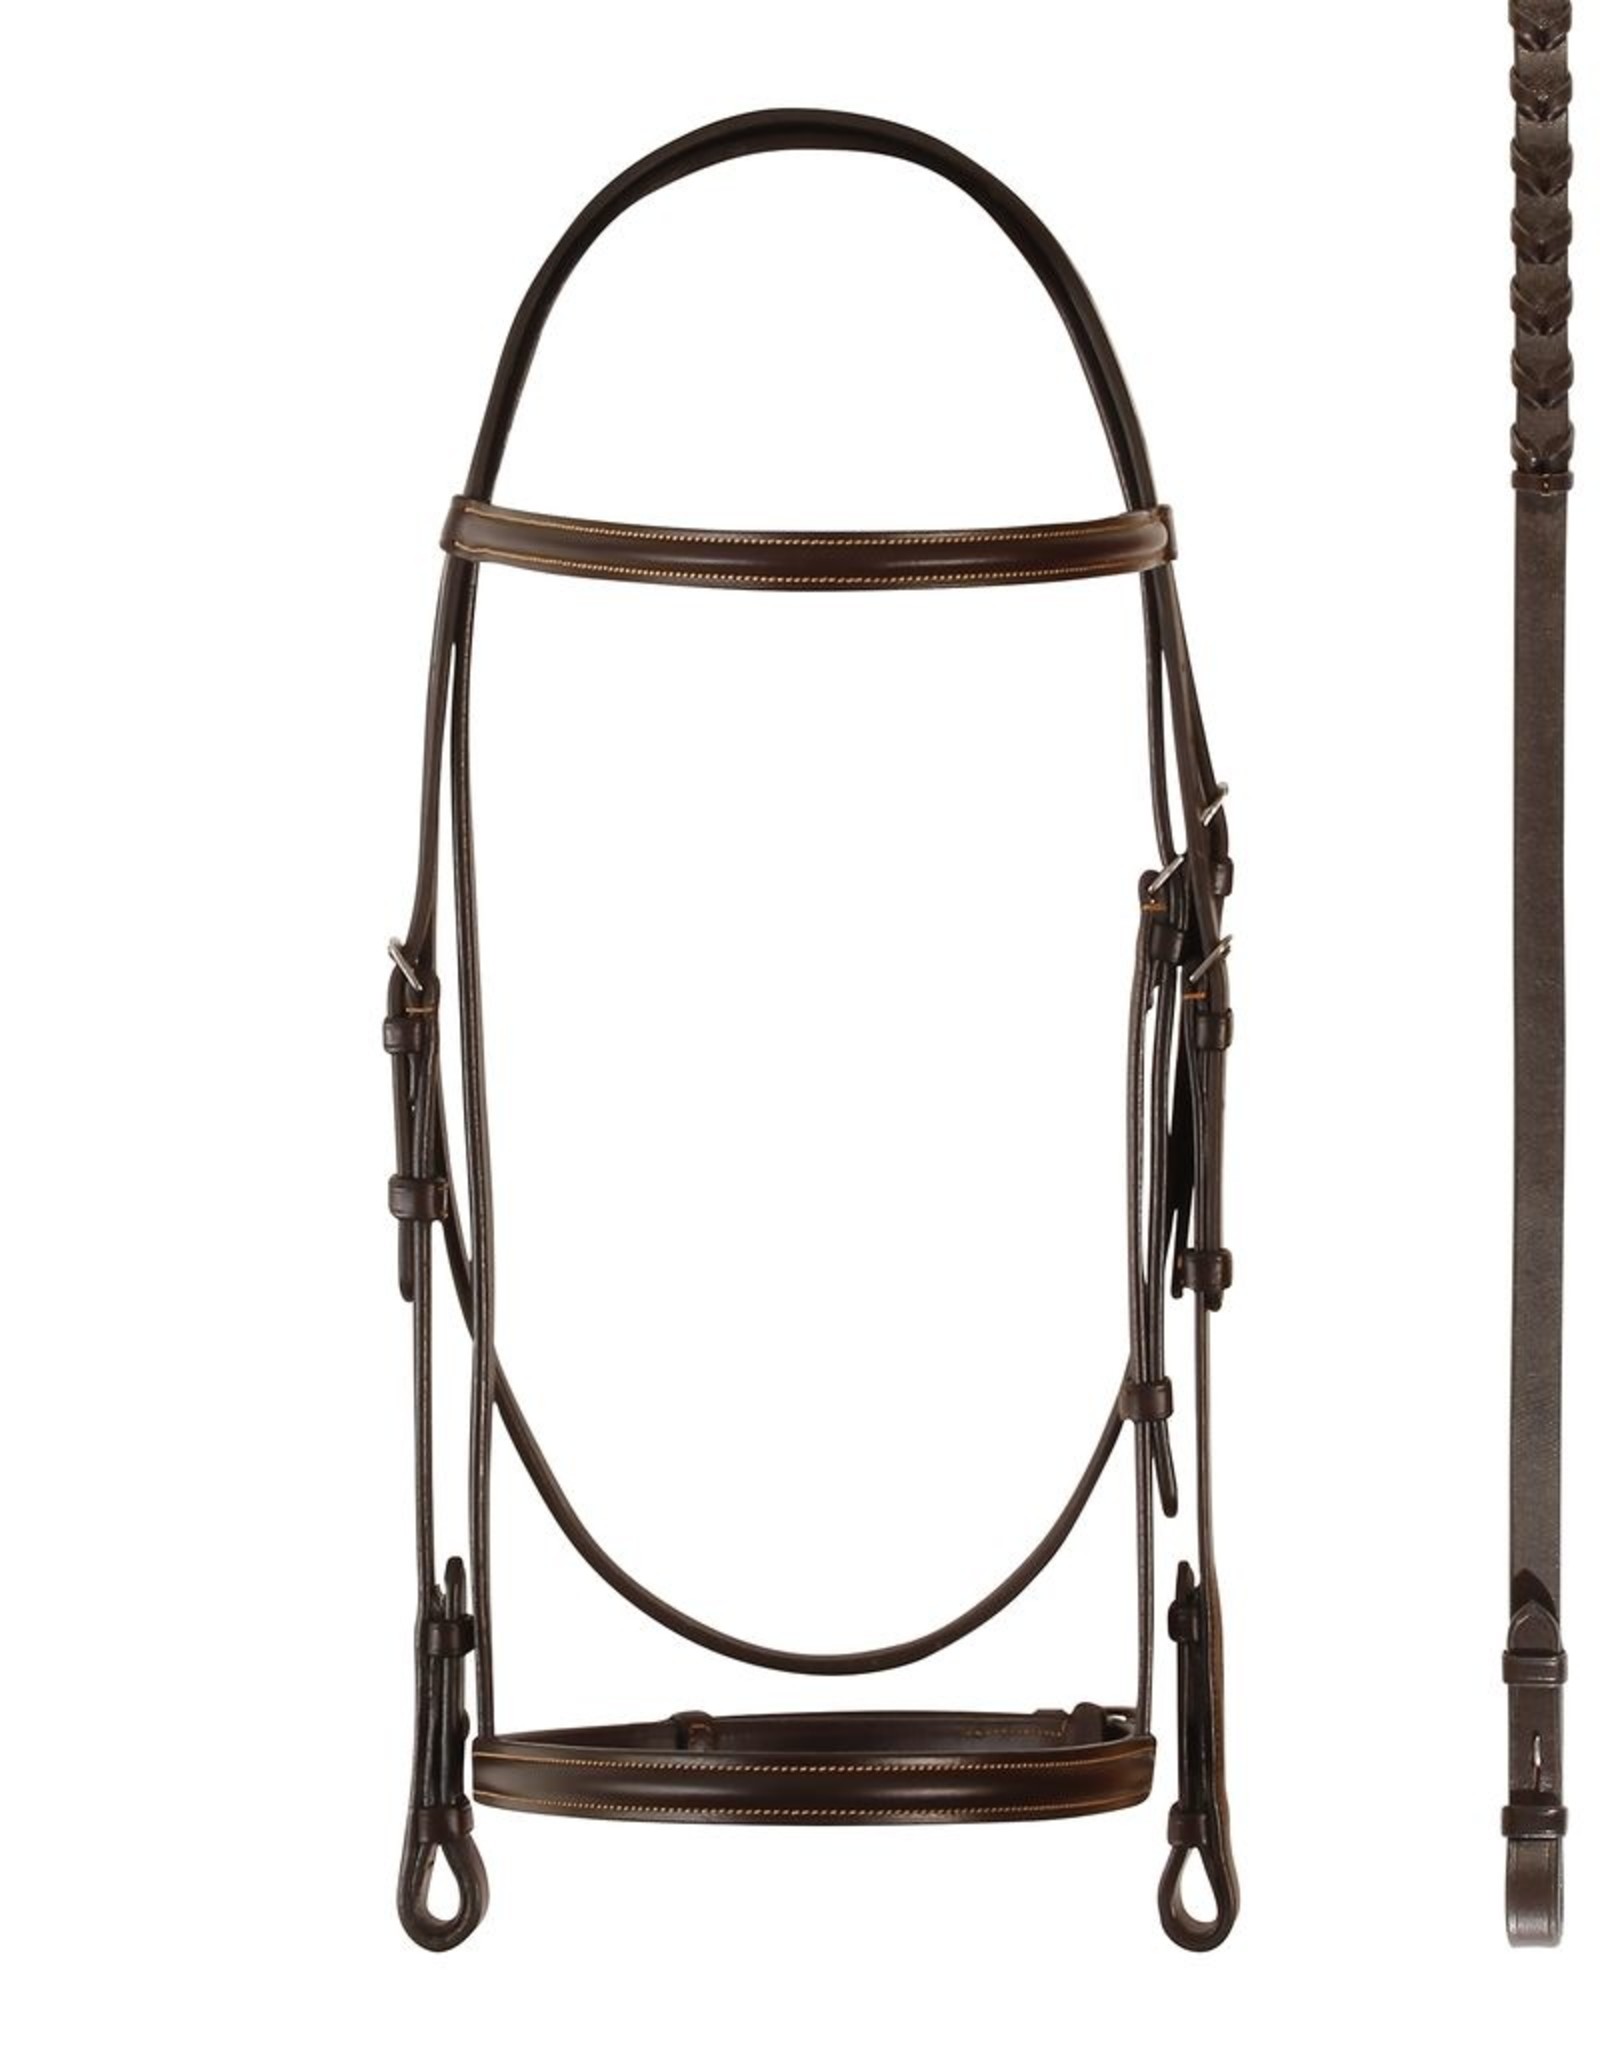 Bobby's Tack Plain Raised with Gold Stitch Bridle